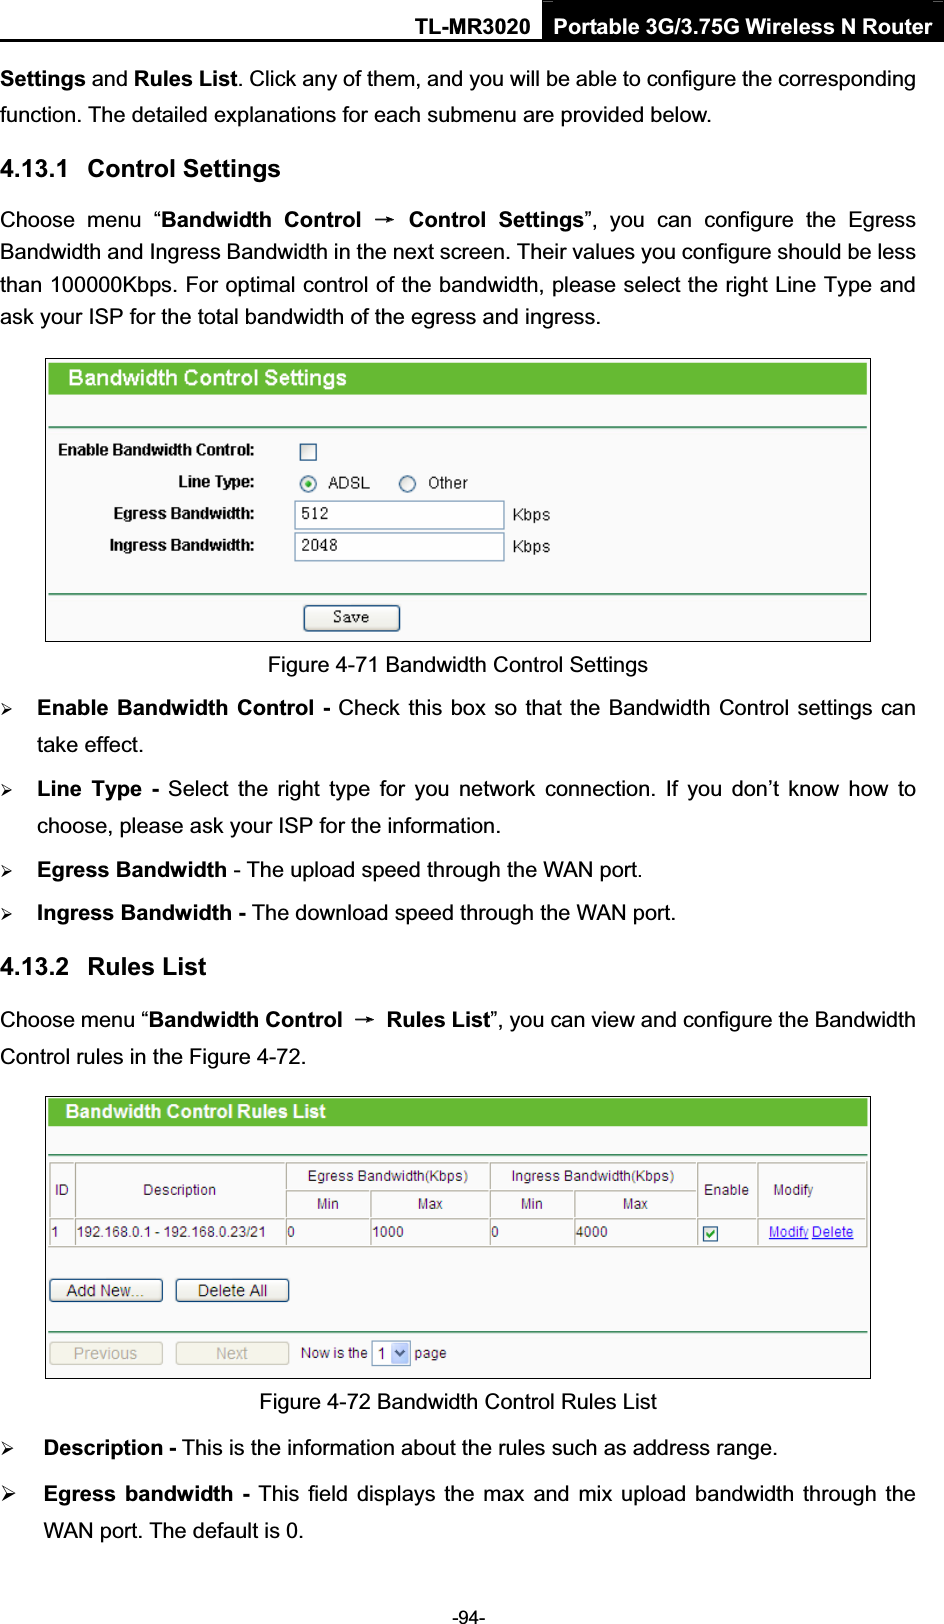 TL-MR3020 Portable 3G/3.75G Wireless N Router-94-Settings and Rules List. Click any of them, and you will be able to configure the corresponding function. The detailed explanations for each submenu are provided below. 4.13.1 Control Settings Choose  menu  “Bandwidth  Control  ė  Control  Settings”,  you  can  configure  the  Egress Bandwidth and Ingress Bandwidth in the next screen. Their values you configure should be less than 100000Kbps. For optimal control of the bandwidth, please select the right Line Type and ask your ISP for the total bandwidth of the egress and ingress.Figure 4-71 Bandwidth Control Settings ¾Enable Bandwidth Control - Check this box so that the Bandwidth Control settings can take effect.¾Line  Type -  Select  the  right  type  for  you  network  connection.  If  you  don’t  know  how  to choose, please ask your ISP for the information.¾Egress Bandwidth - The upload speed through the WAN port.¾Ingress Bandwidth - The download speed through the WAN port.4.13.2 Rules List Choose menu “Bandwidth Control  ė  Rules List”, you can view and configure the Bandwidth Control rules in the Figure 4-72. Figure 4-72 Bandwidth Control Rules List ¾Description - This is the information about the rules such as address range.¾Egress  bandwidth  -  This  field  displays  the  max  and mix upload bandwidth through the WAN port. The default is 0. 